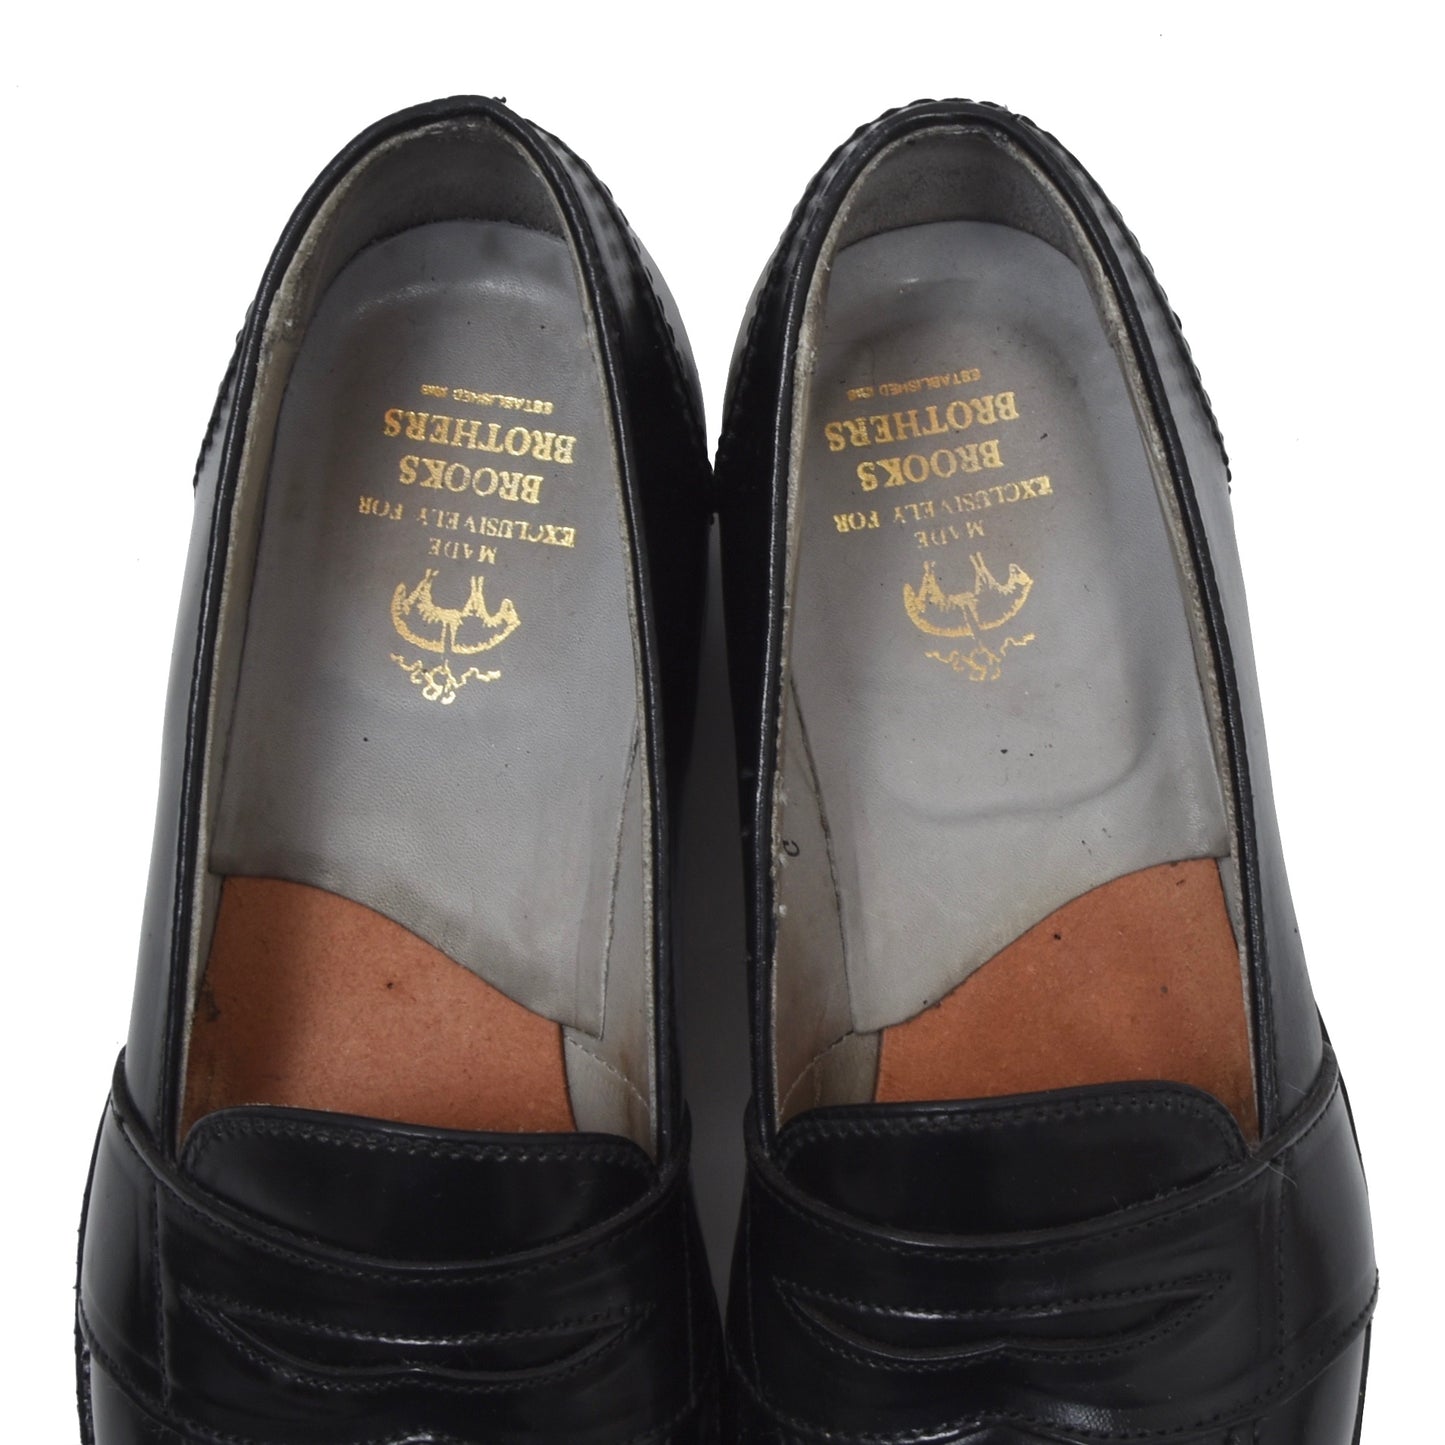 Brooks Brothers x Alden Shell Cordovan Loafers Size 7.5 A/C - Black